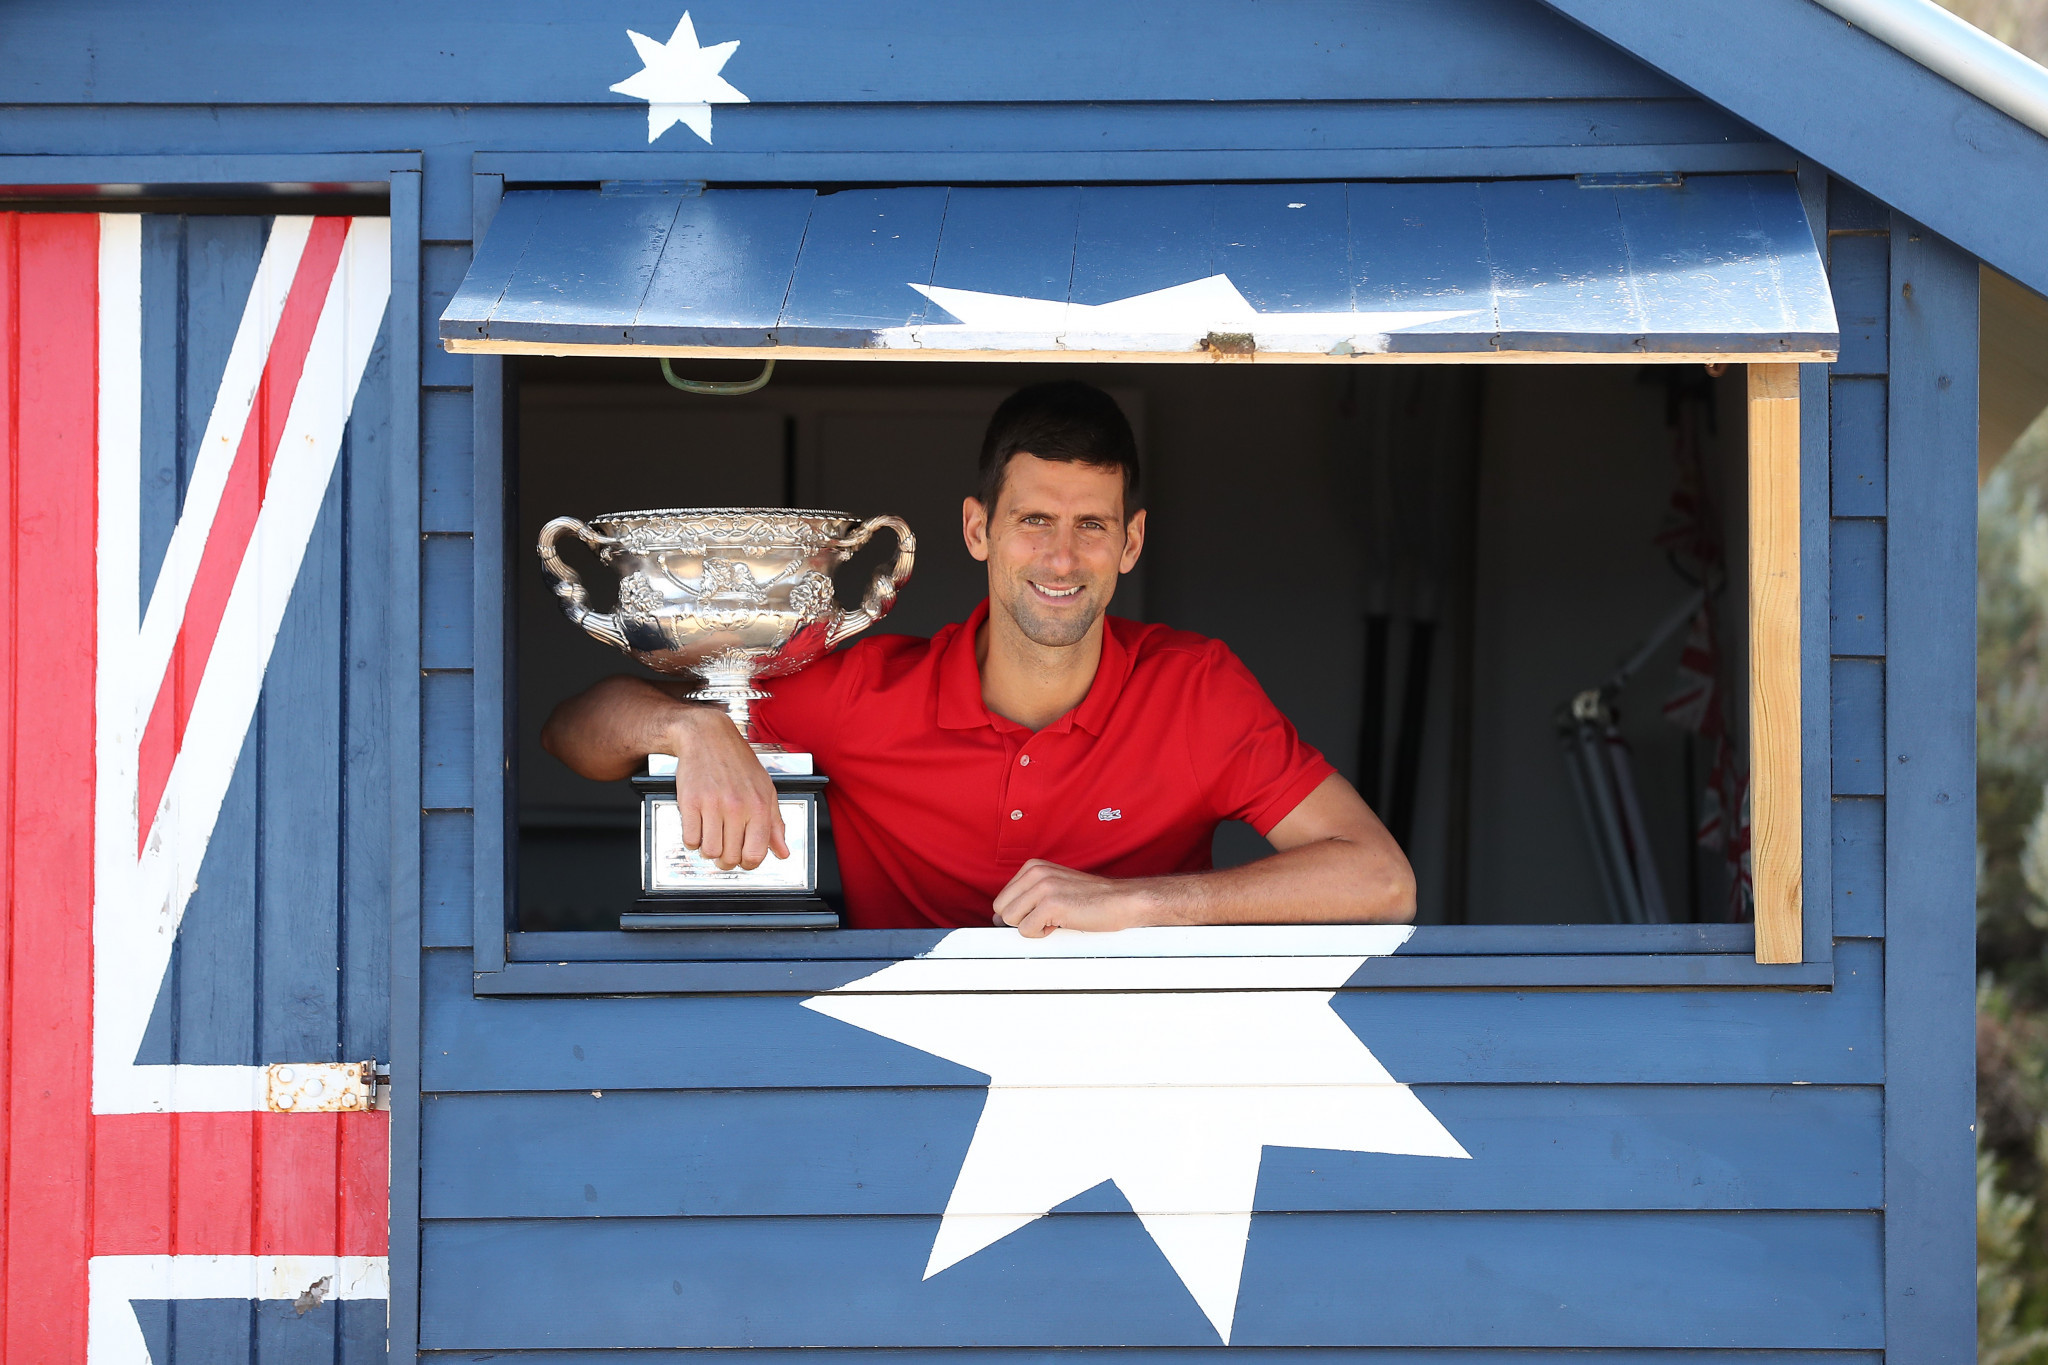 Serbia's Novak Djokovic is aiming to compete for a record 21st men's singles Grand Slam at the Australian Open ©Getty Images